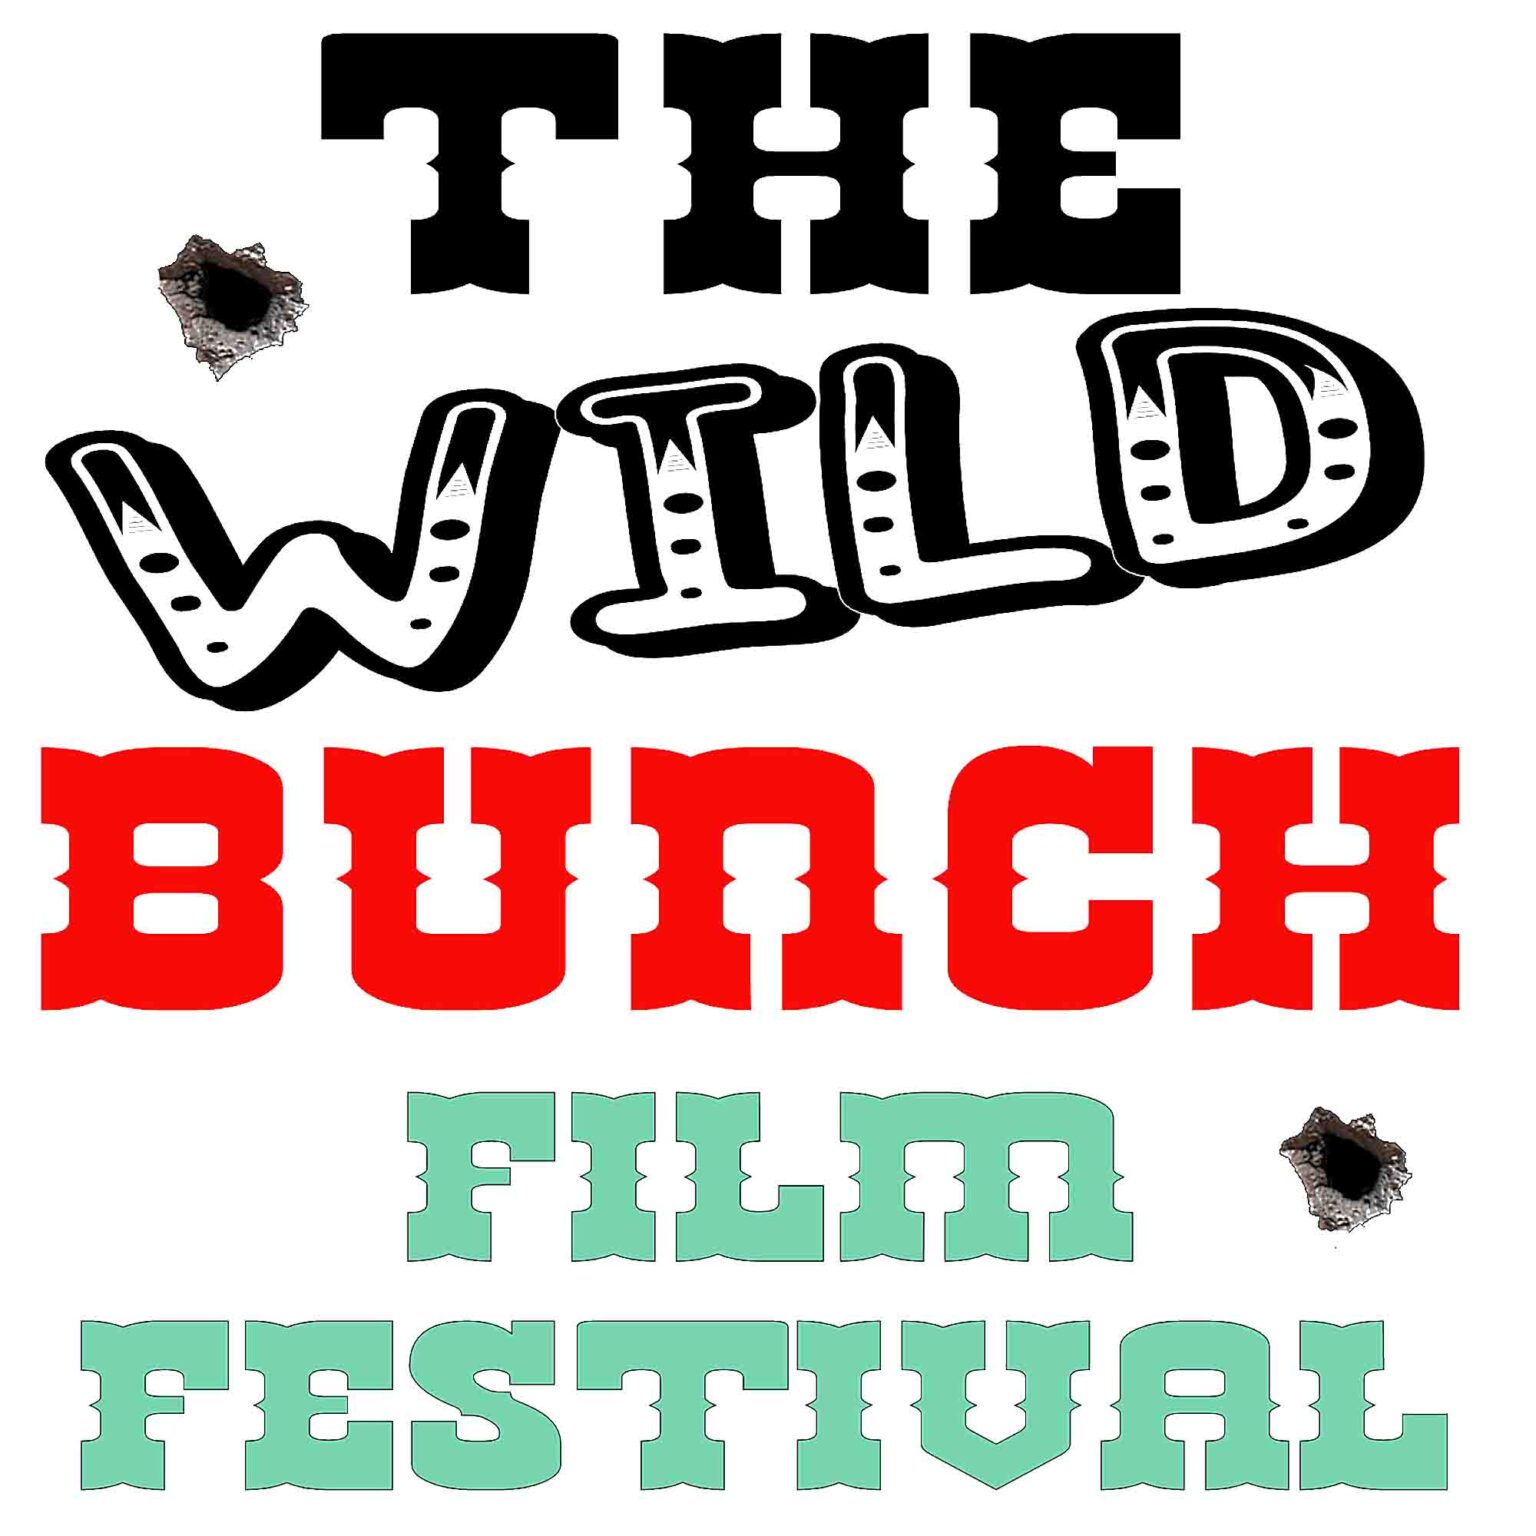 The Wild Bunch Film Festival is an international event celebrating western movies and their creators. Here's all the information you need.